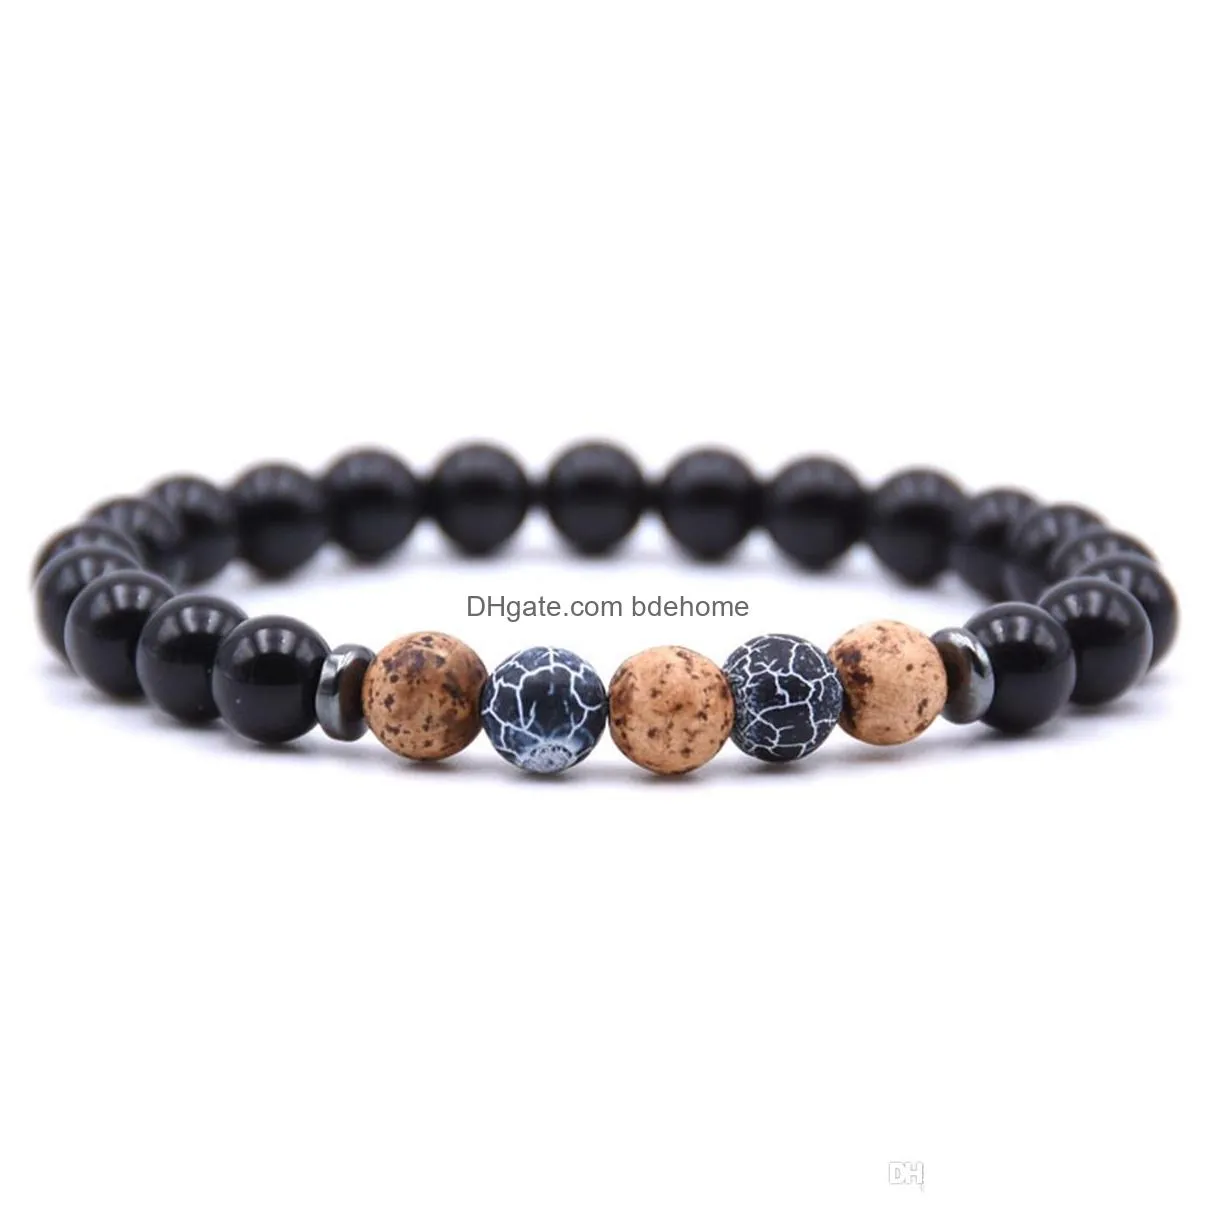 ladies bracelet 8mm lava rock aromatherapy anxiety oil disperser wrist ornament braided rope natural stone yoga bead hand ornament